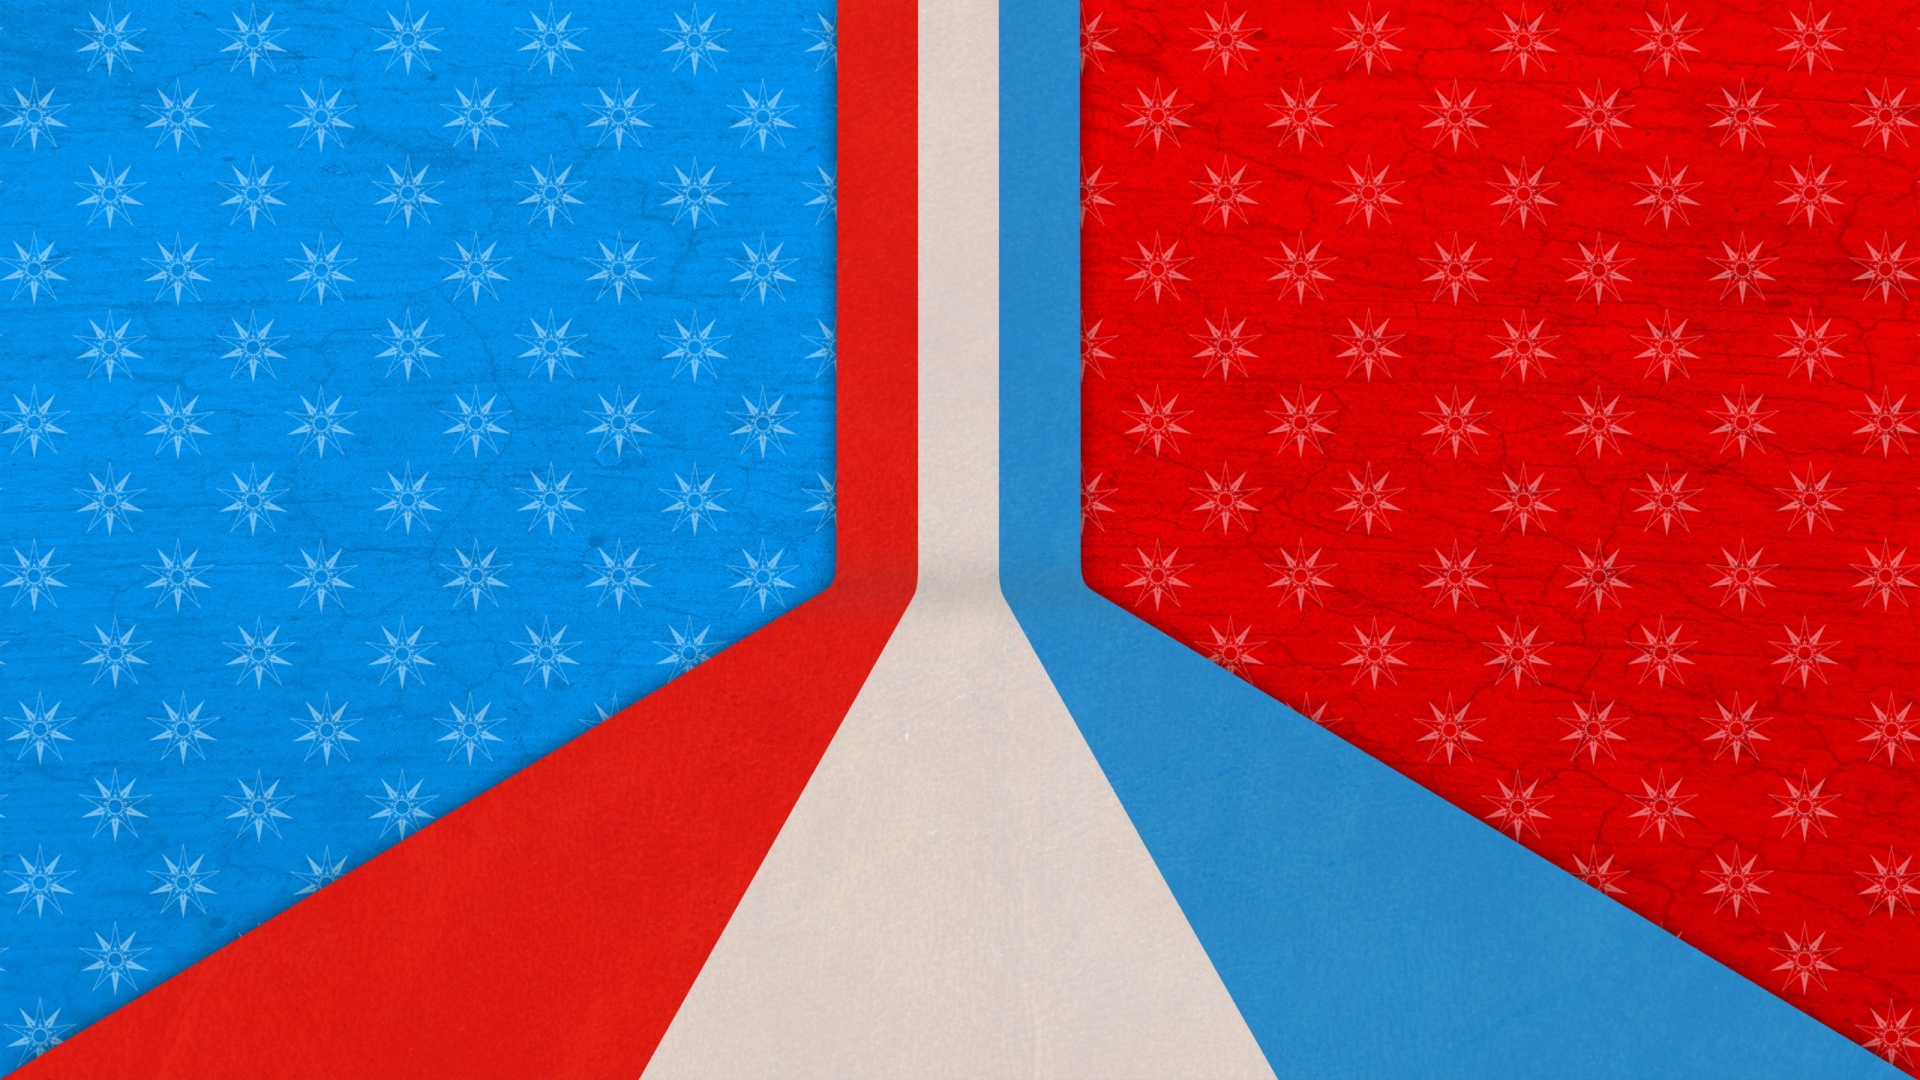 66+] Red White And Blue Backgrounds - WallpaperSafari